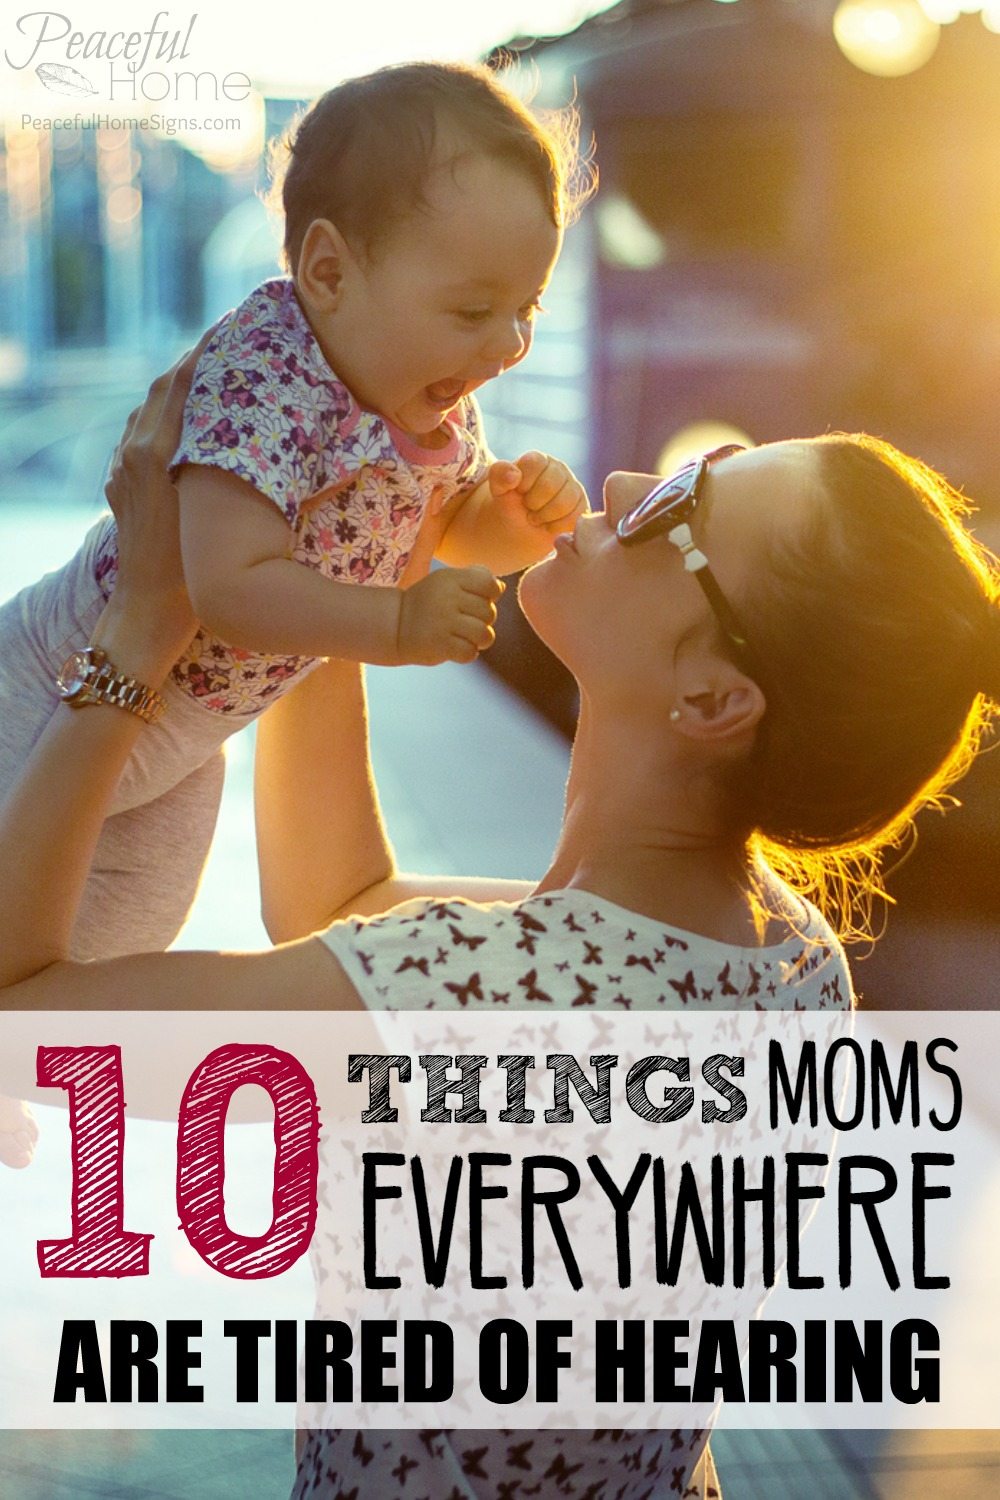 10 Things Moms Everywhere Are Tired of Hearing | Funny post about motherhood | Momma Humor | Tired mommy subjects | Similac Commercial | Funny parenting post | Controversial mommy topics | Important mom lessons | Right and wrong parenting